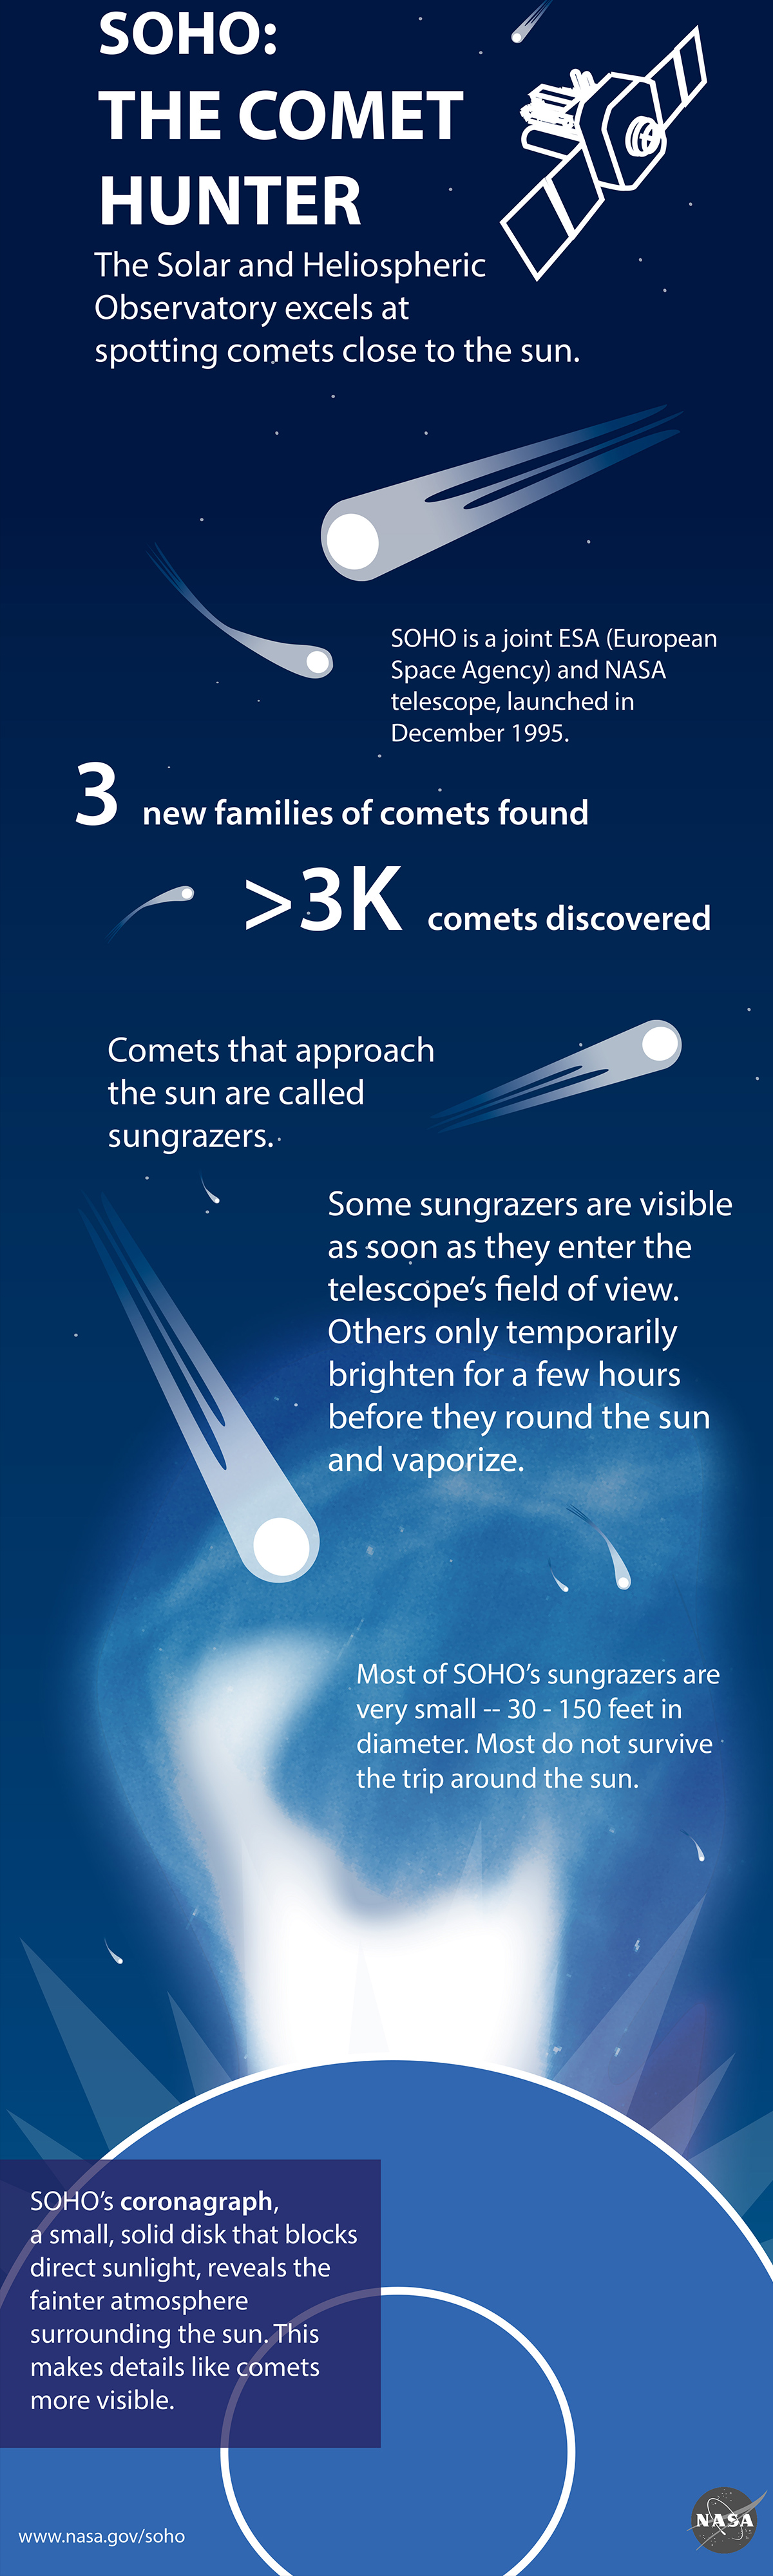 On 13 Sep 2015, the Solar and Heliospheric Observatory—a joint project of the European Space Agency and NASA—discovered its 3,000th comet, cementing its standing as the greatest comet finder of all time.